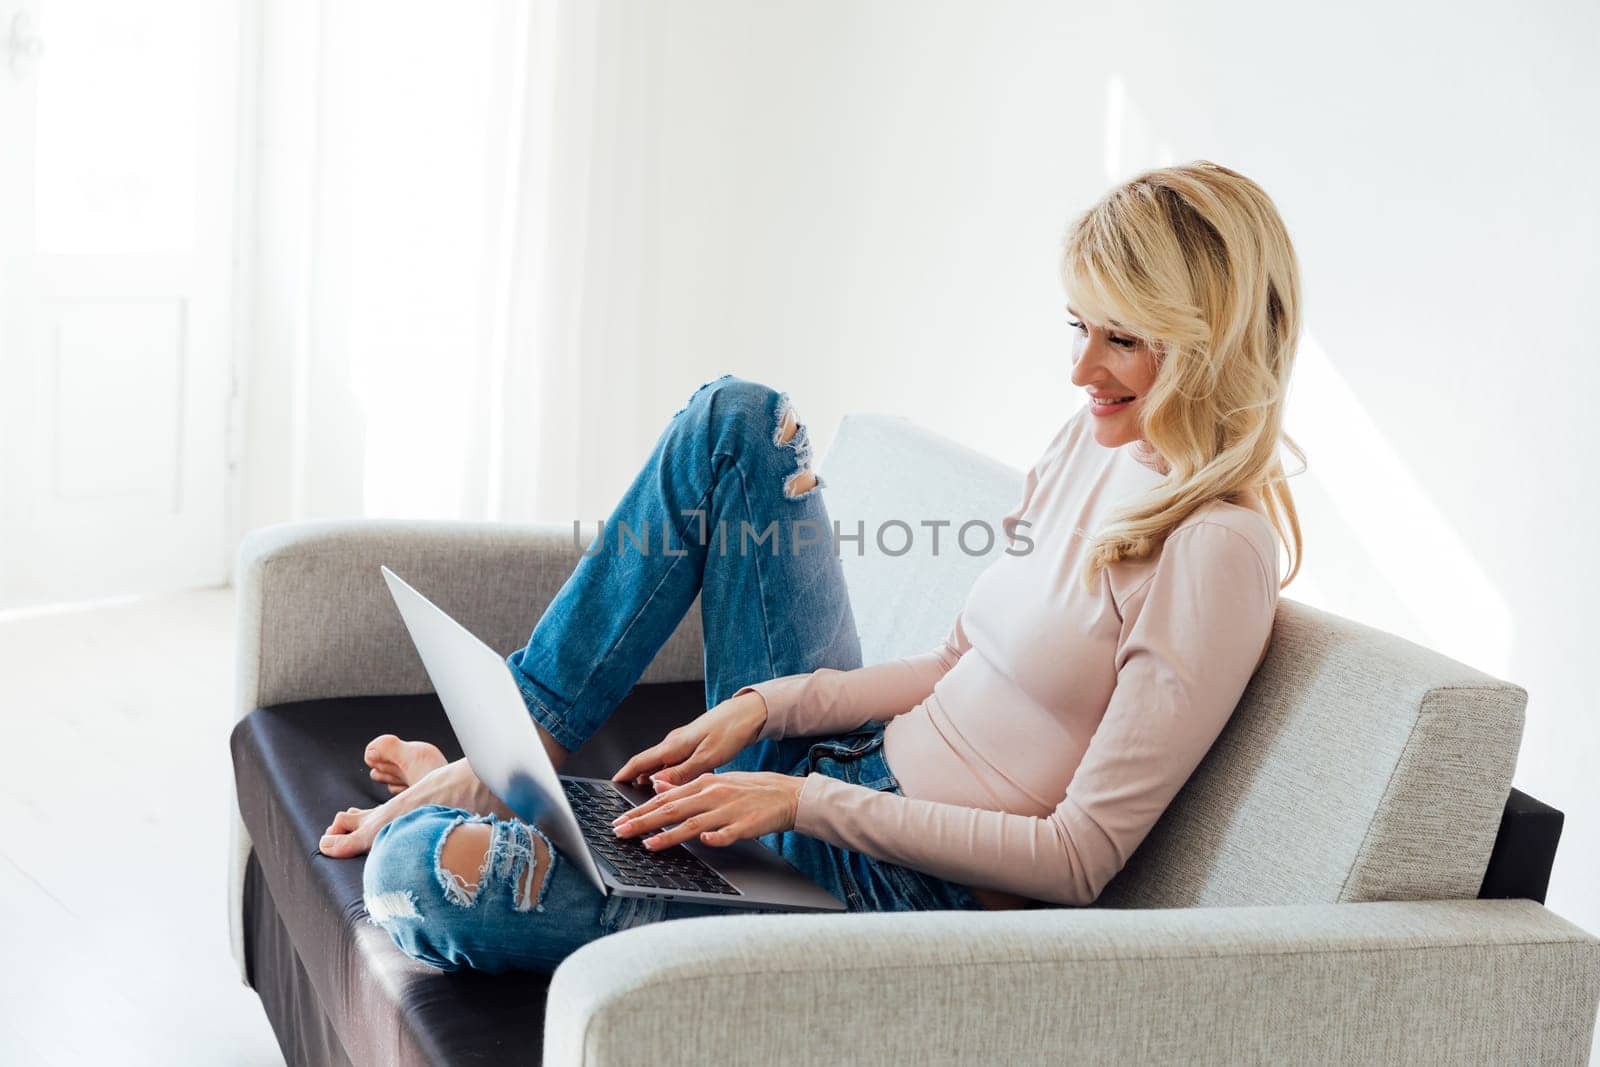 Blonde woman working on laptop on couch small business online by Simakov